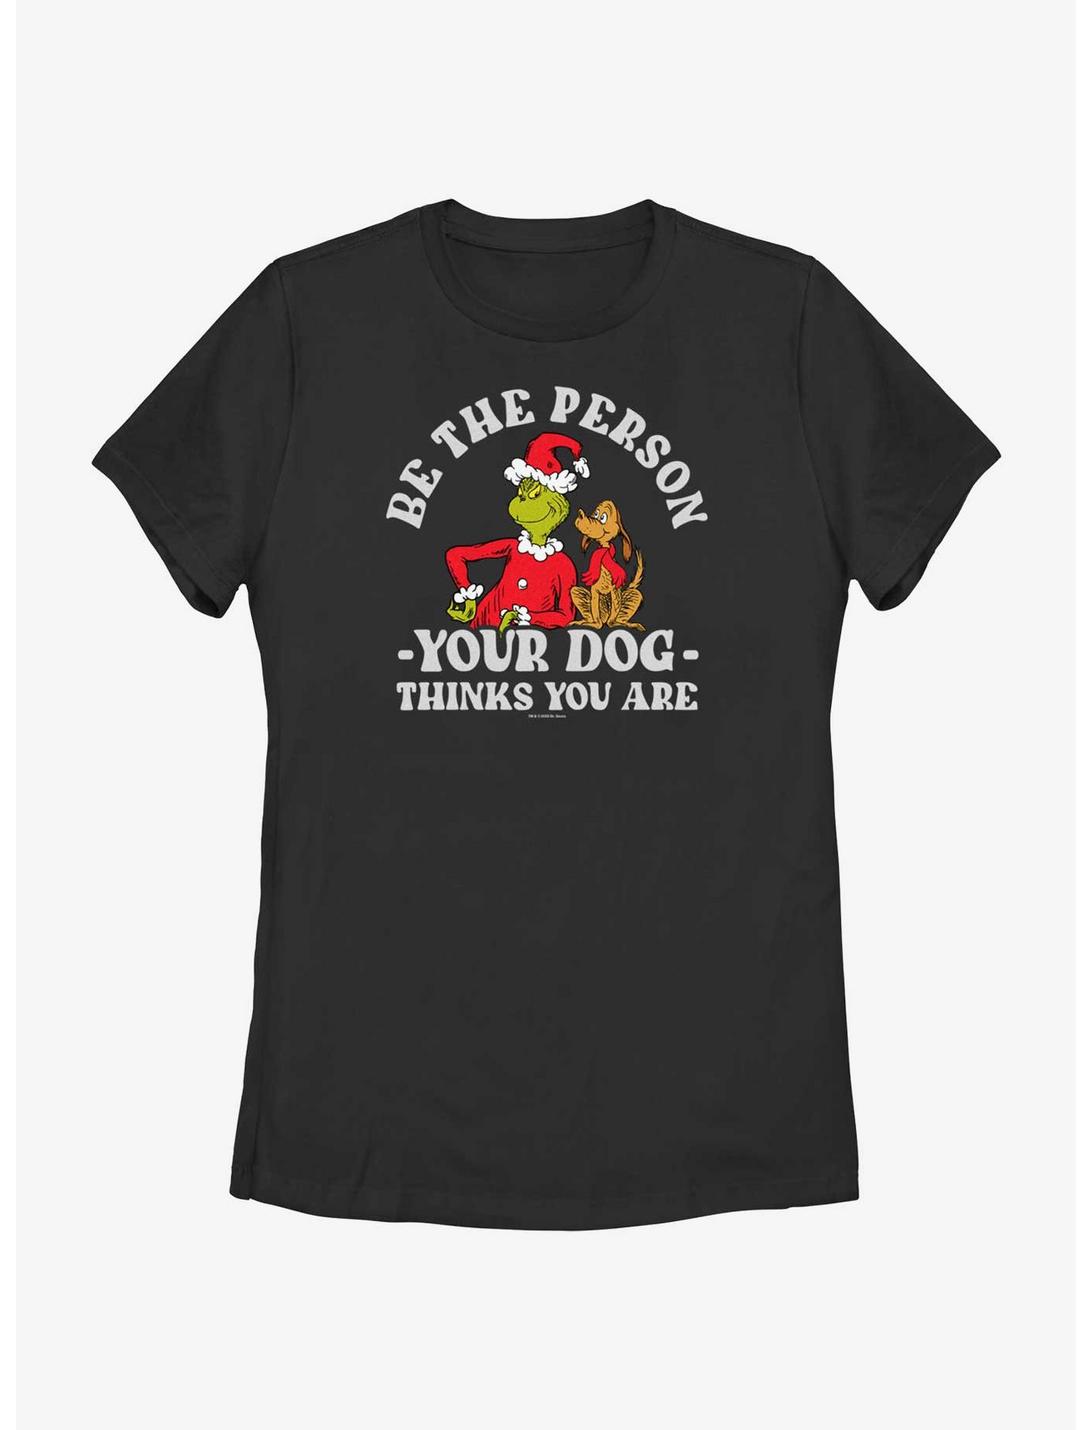 Dr. Seuss Grinch and Max Be The Person Your Dog Thinks You Are Womens T-Shirt, BLACK, hi-res